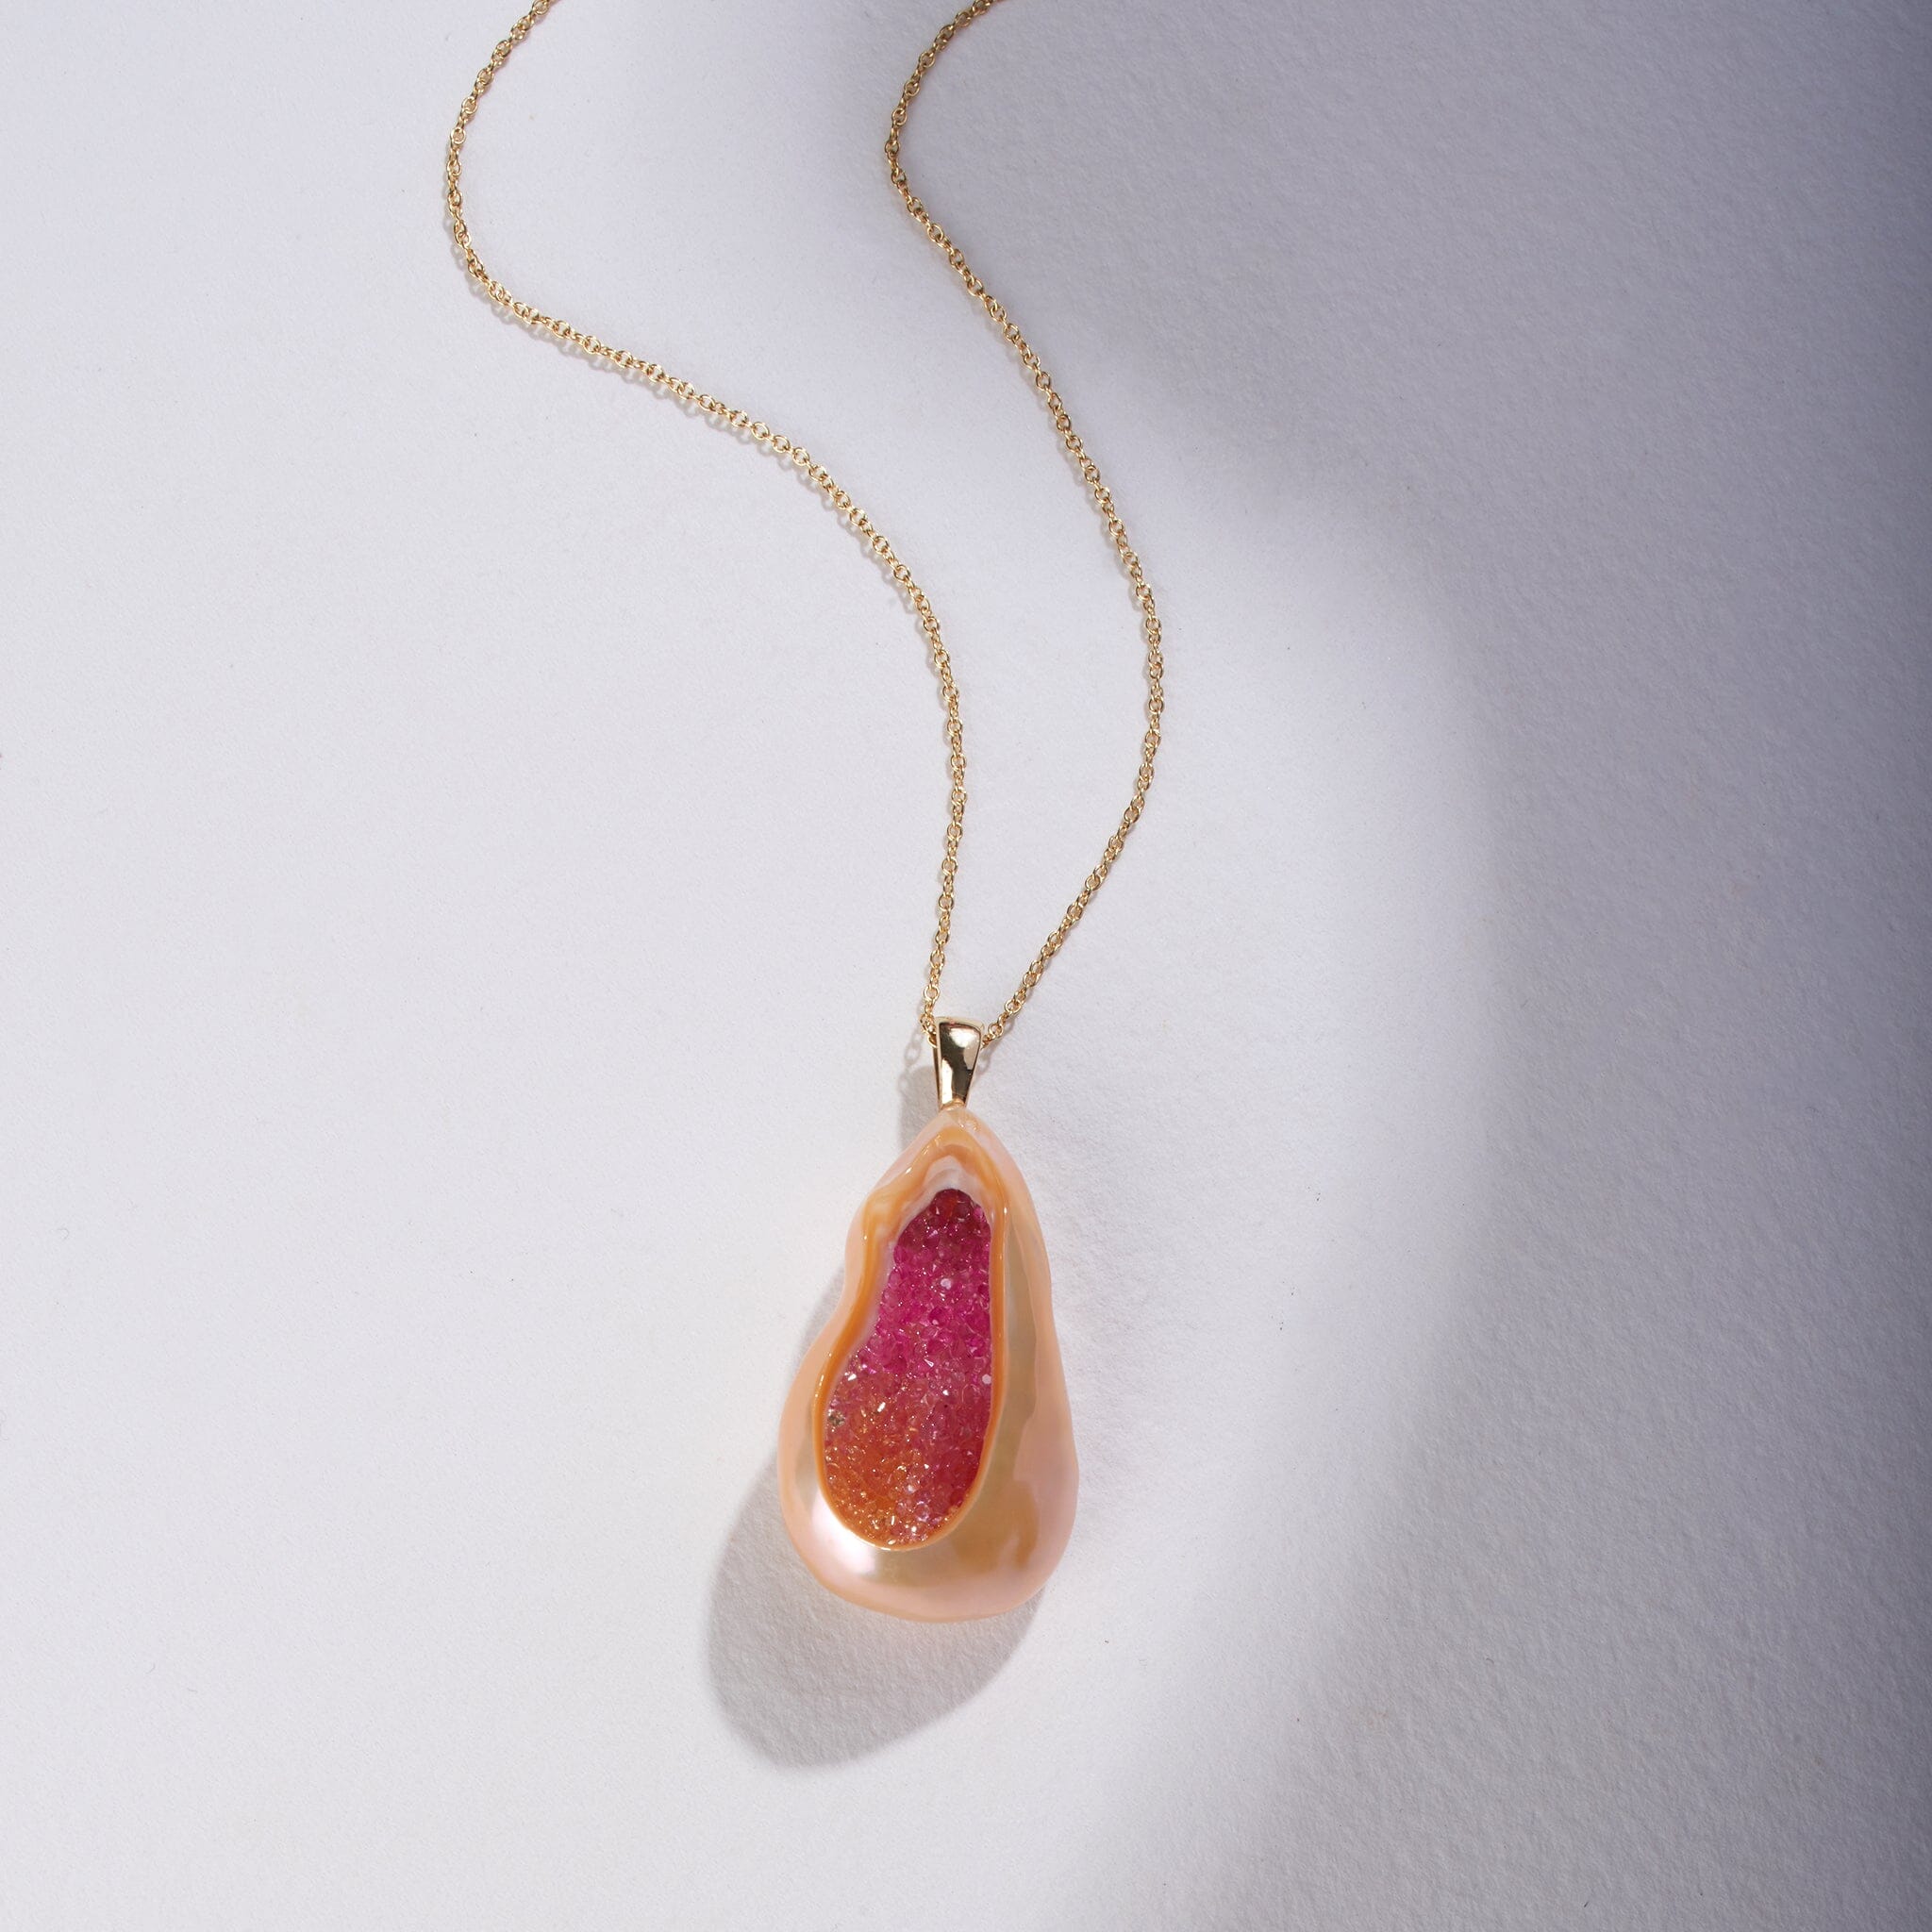 Freshwater Souffle Pearl Finestrino Pendant with Pink to Yellow Sapphire Ombre